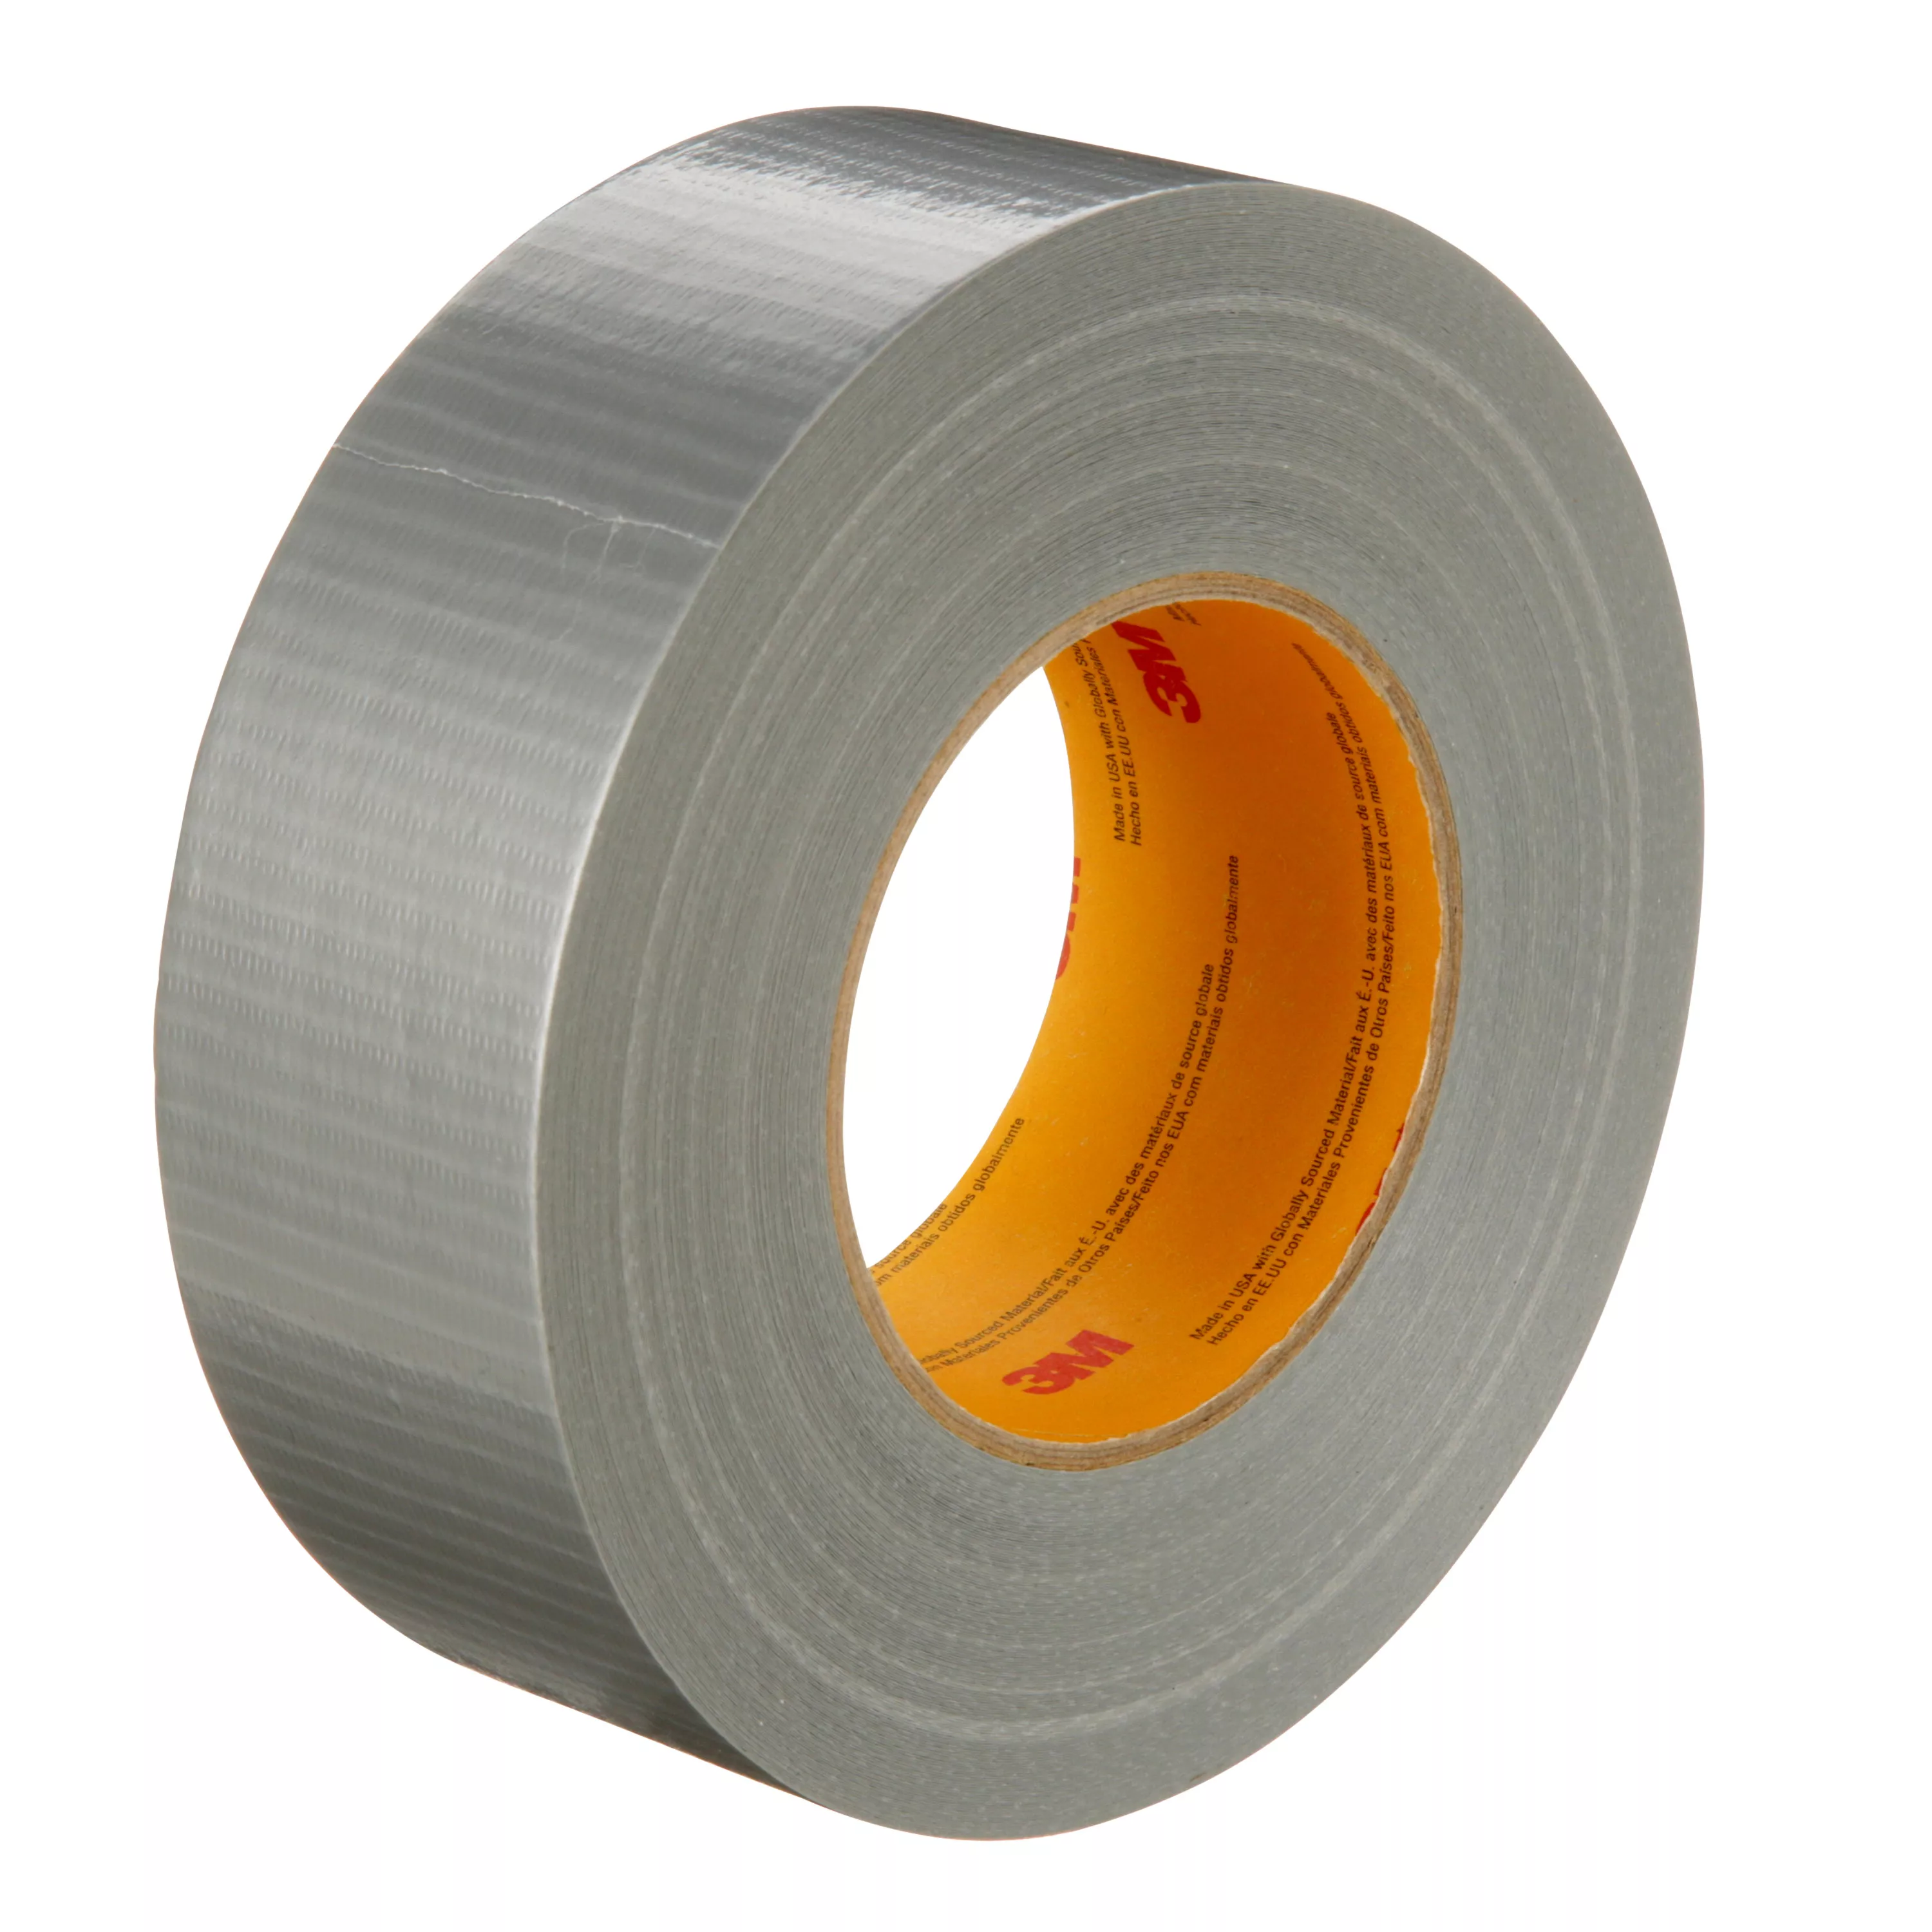 3M™ Venture Tape™ All Purpose Duct Tape 1501, Gray, 48 mm x 5 5m (1.88
in x 60.1 yd), 24/Case